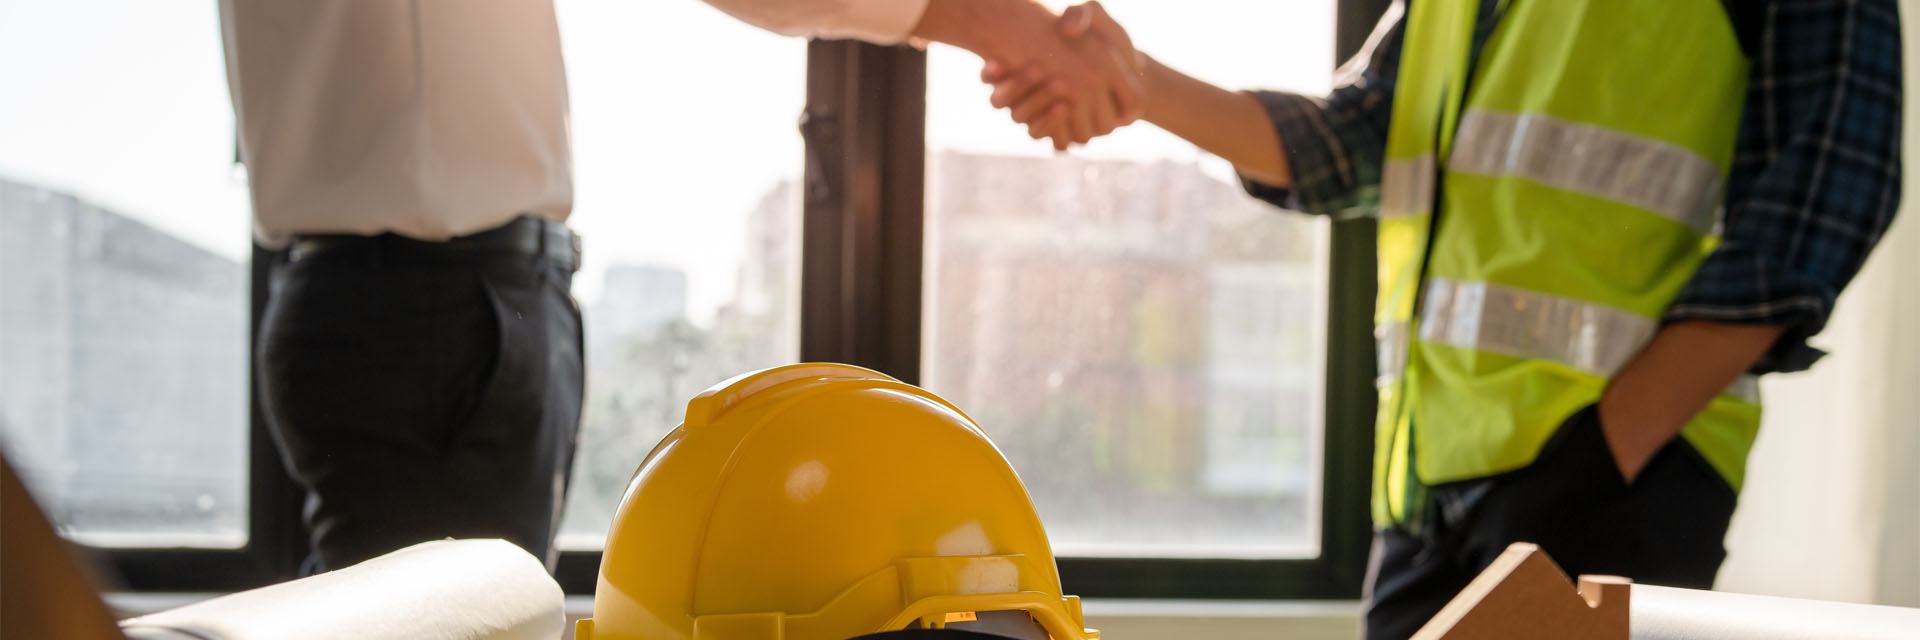 Image showing a close up of two men shaking hands, one wearing a high vis vest with a hard hat in front